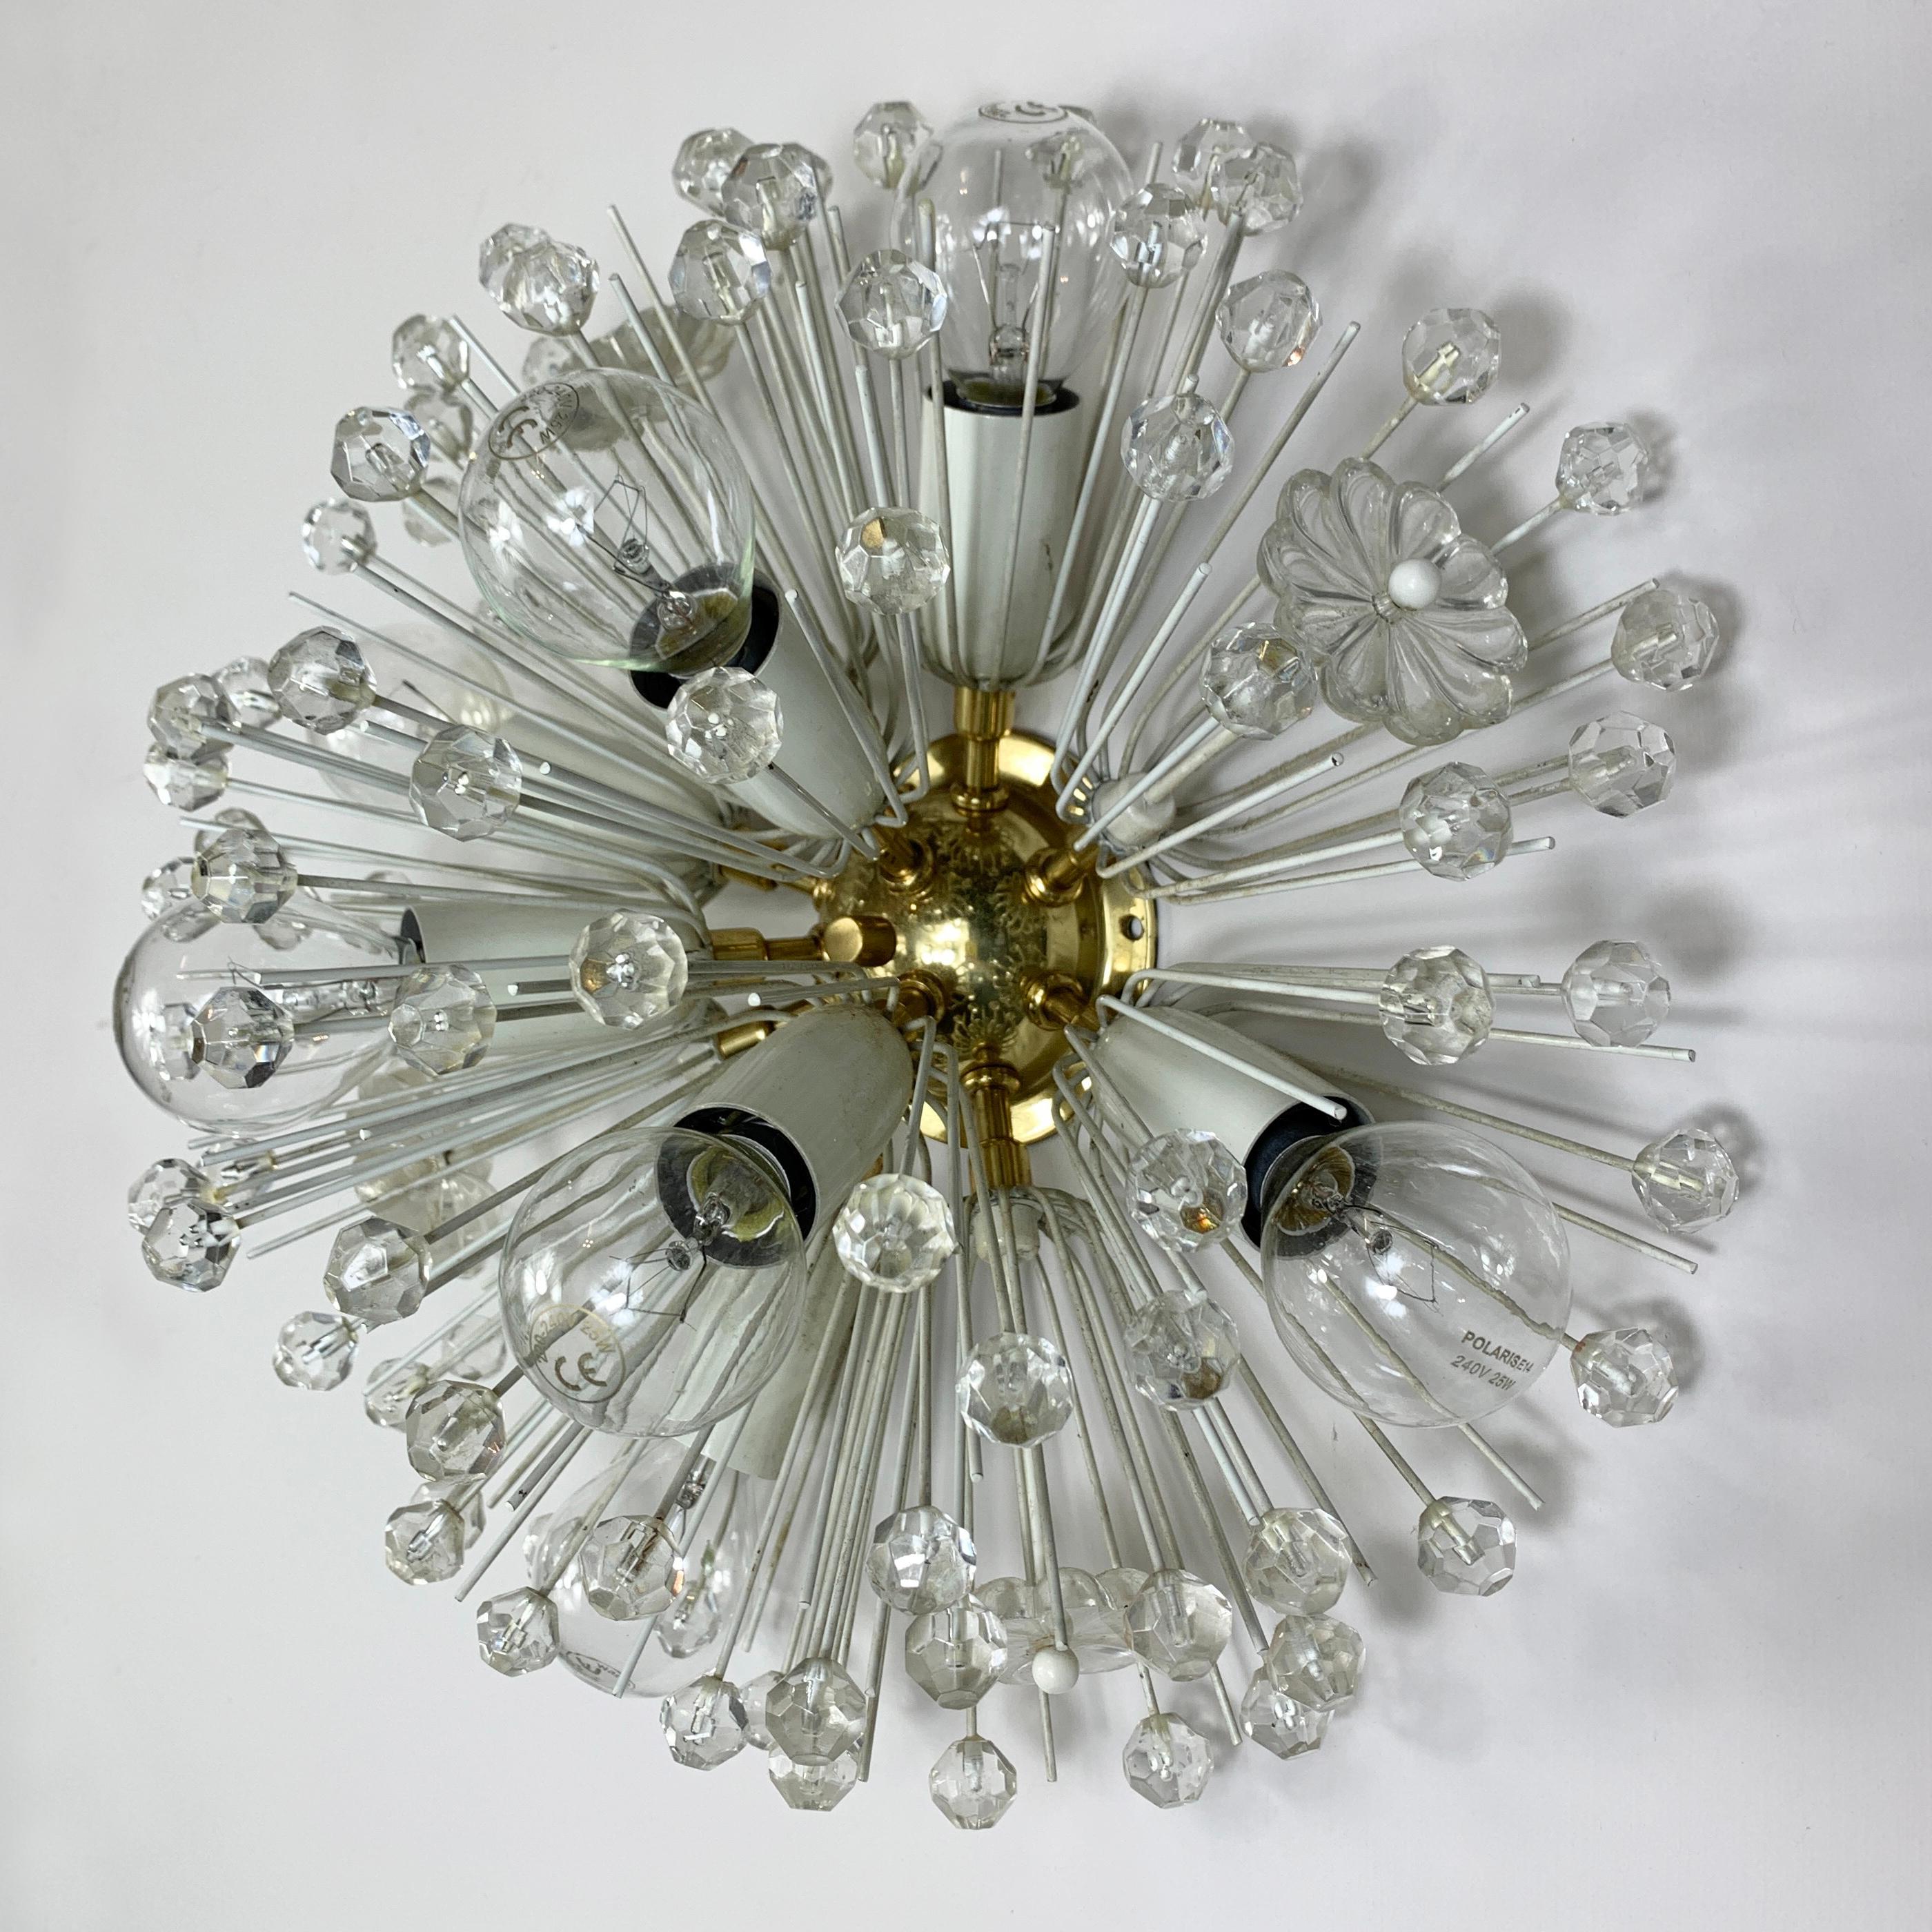 A glorious brass and crystal ceiling pendant, 'Snowball' by Emil Stejnar for the Rupert Nikoll company. Dating to the 1950's this beautiful light is made up of crystal flowers and cut crystal spheres that radiate from the central brass mount. There